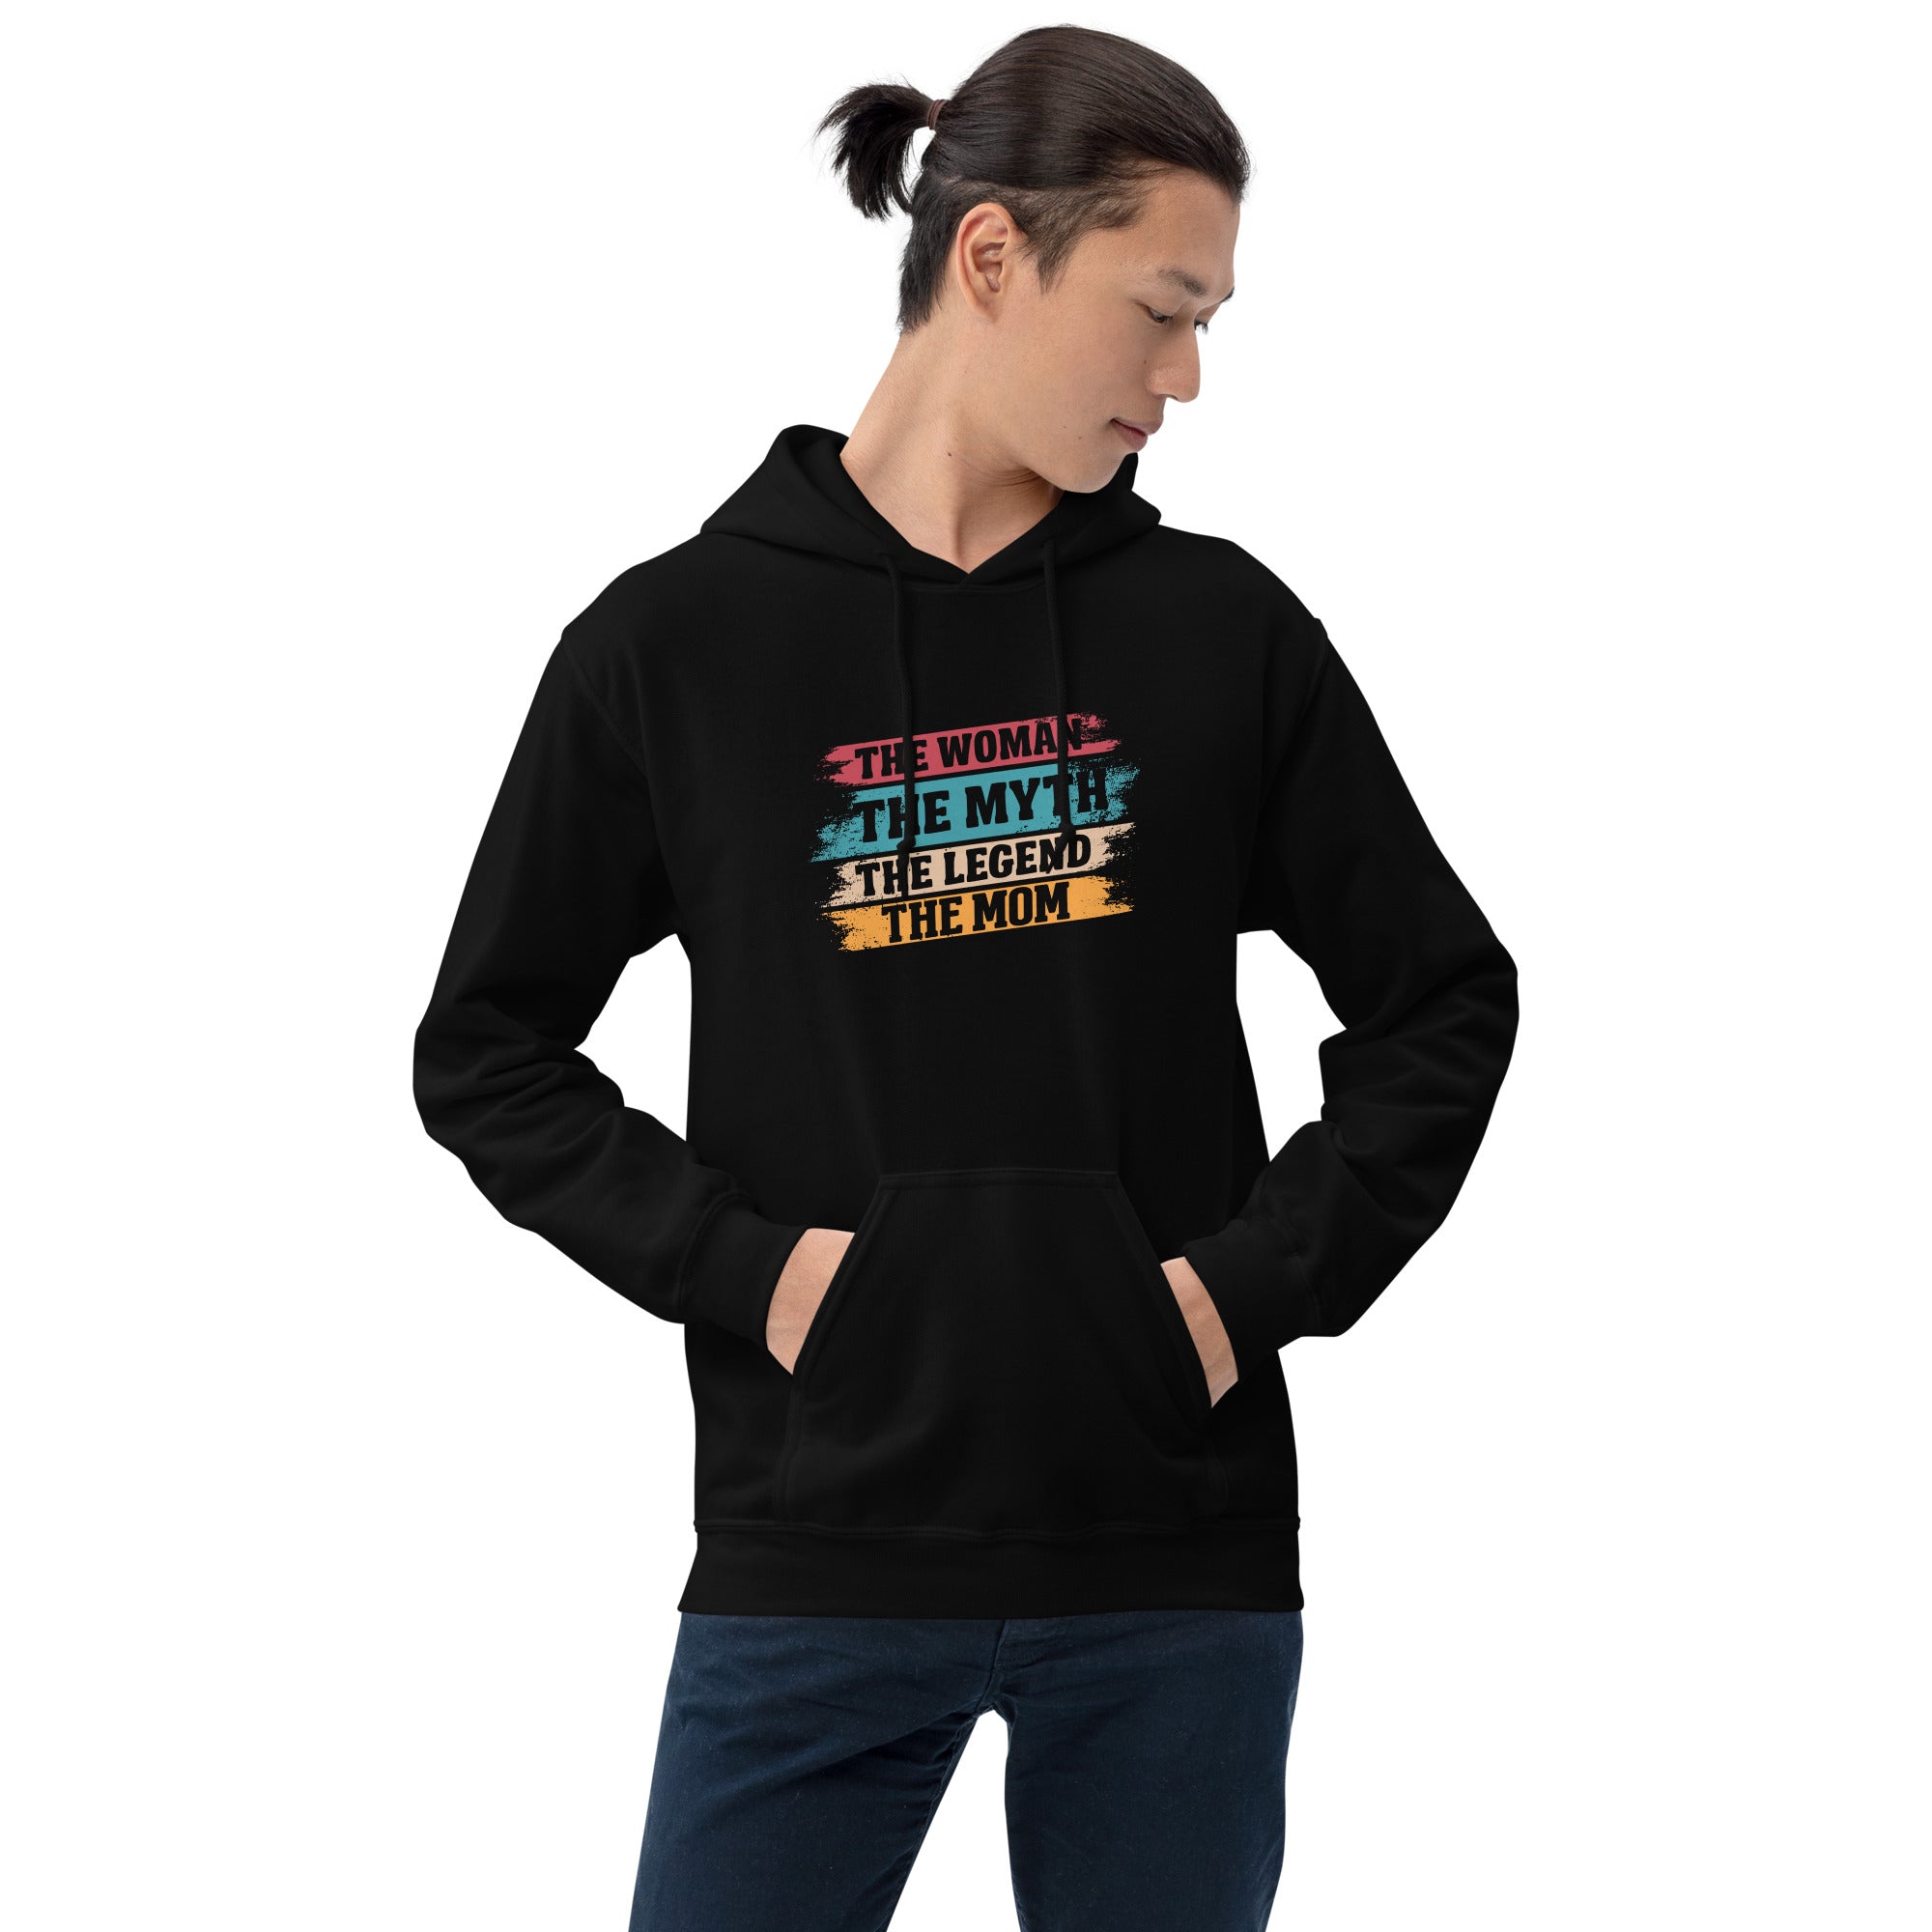 The Myth The Woman The Legend - Unisex Hoodie